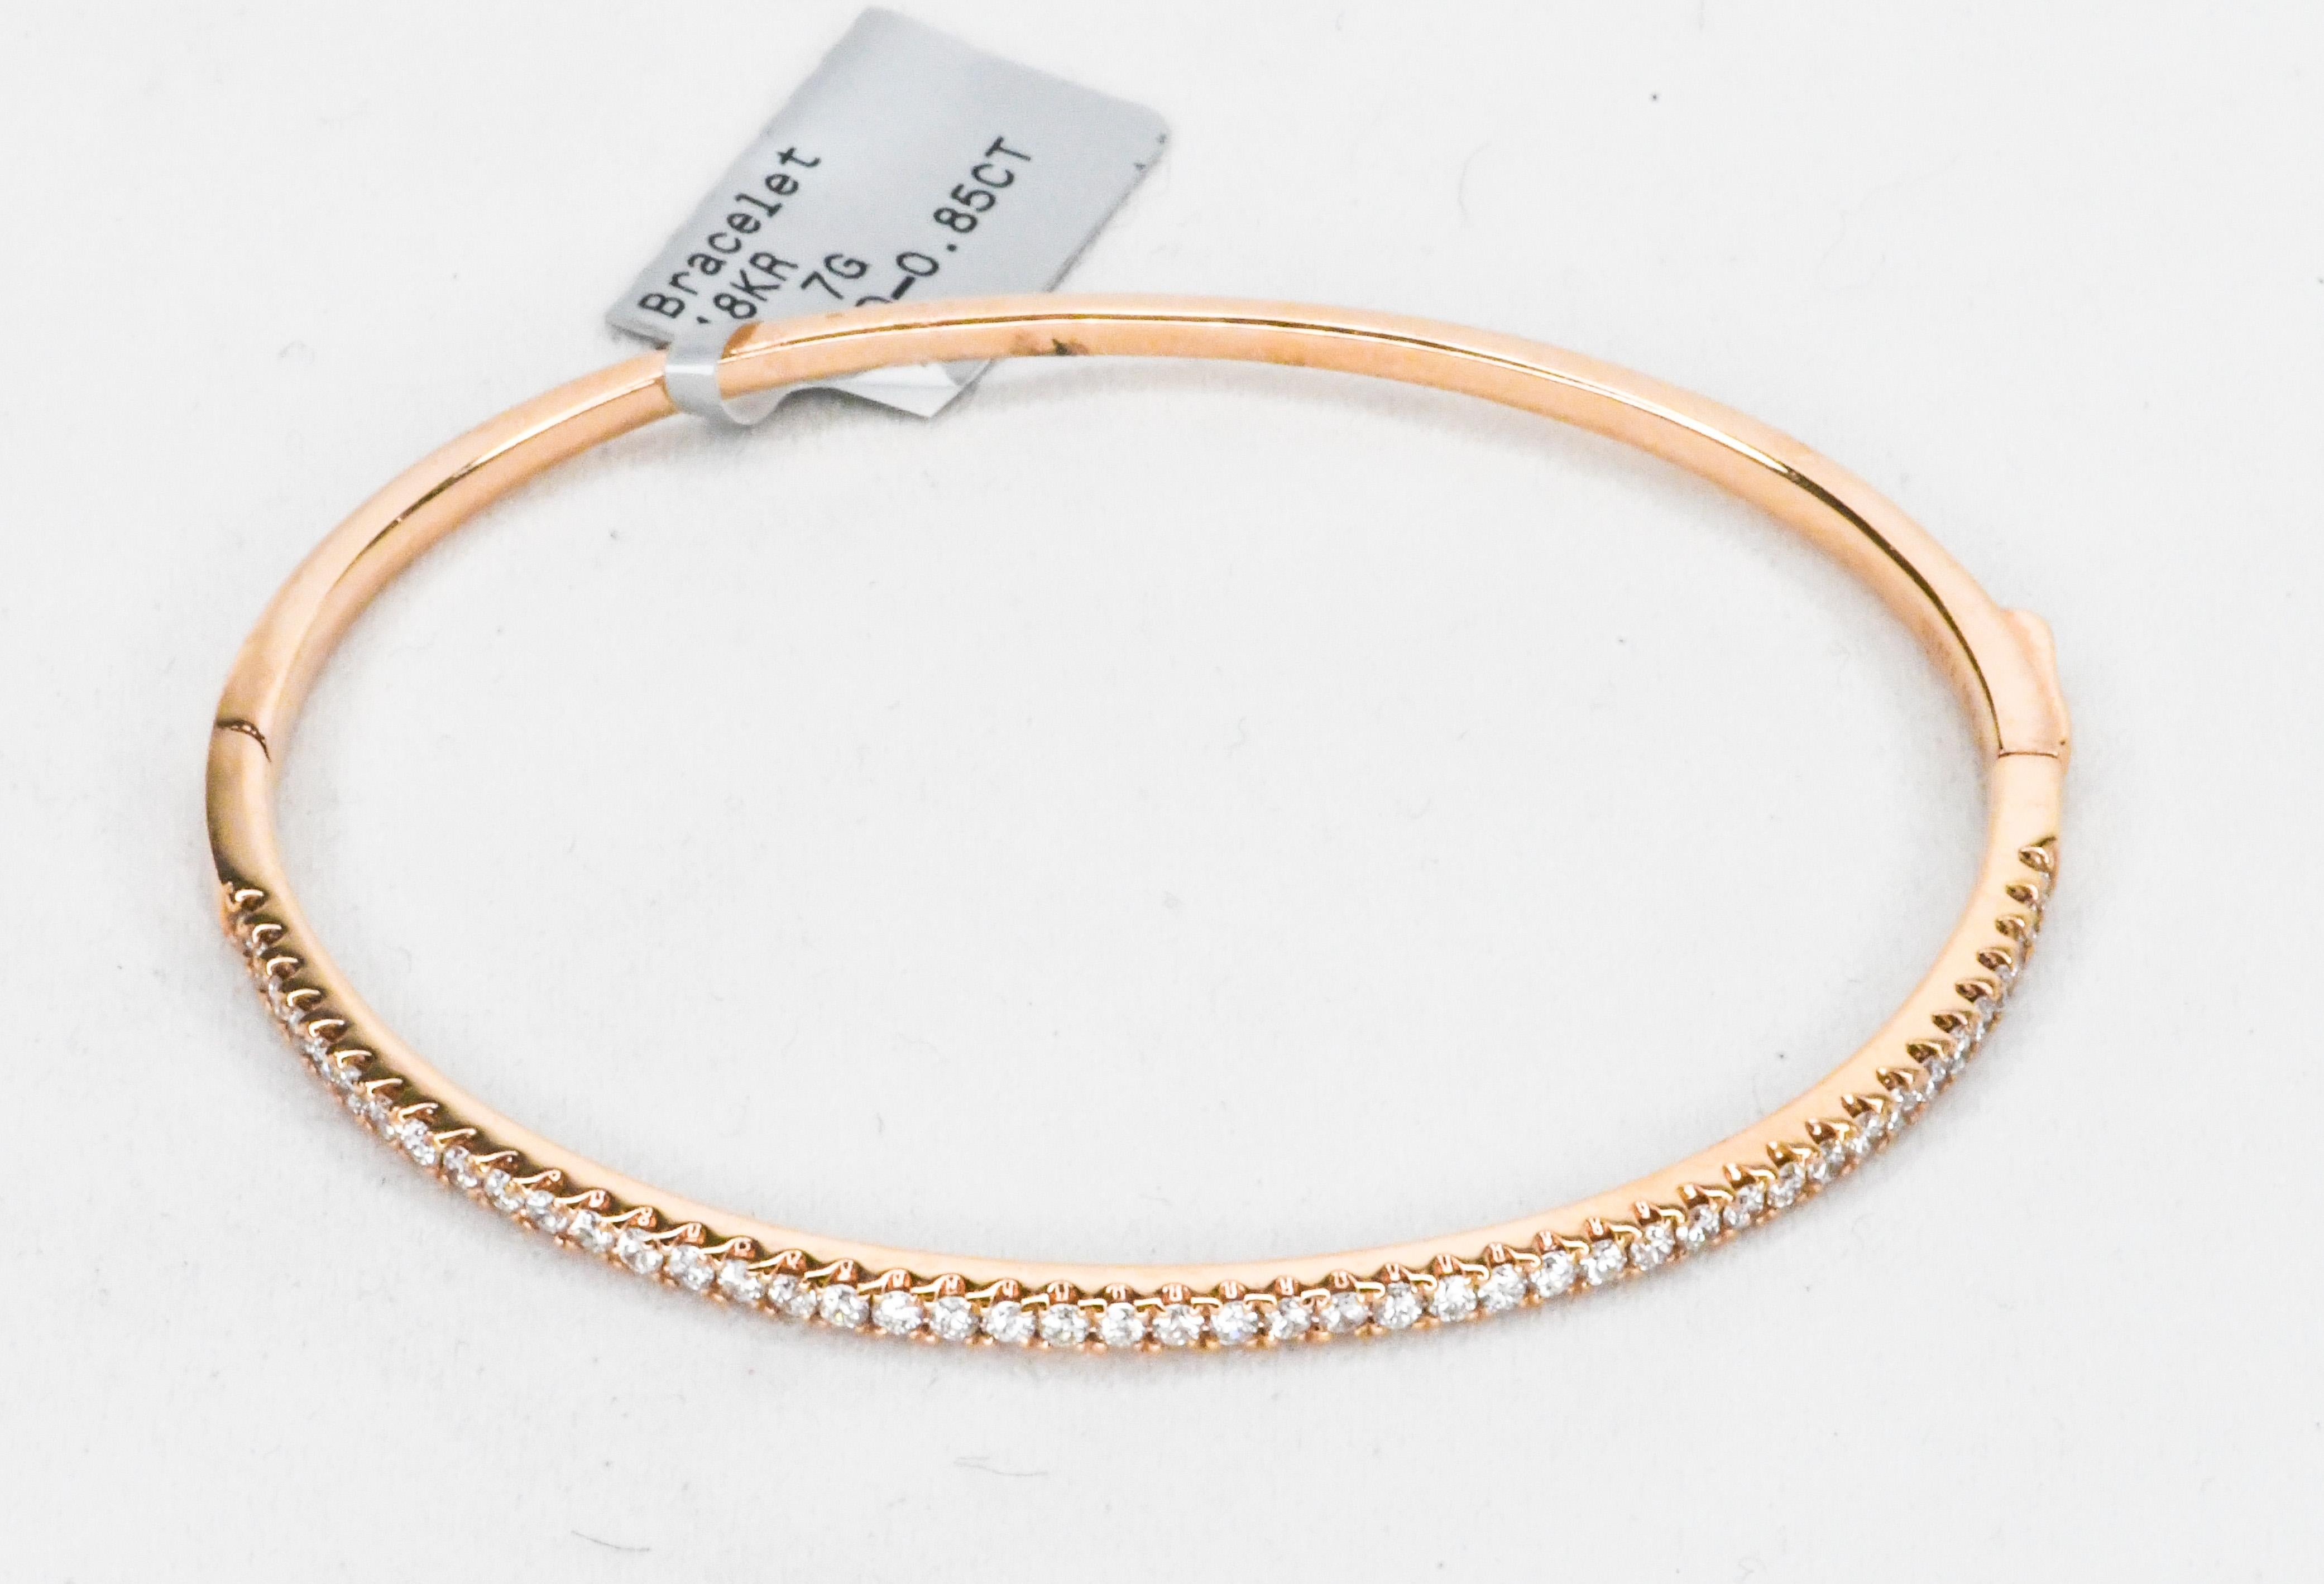 Rose Gold has a warmth that looks great on all skin tones.  Rich color!  This bangle bracelet has a clamper clasp that will click twice for security.  Top is a single row of beautifully matched white diamonds having a total weight of 0.85 carats. 